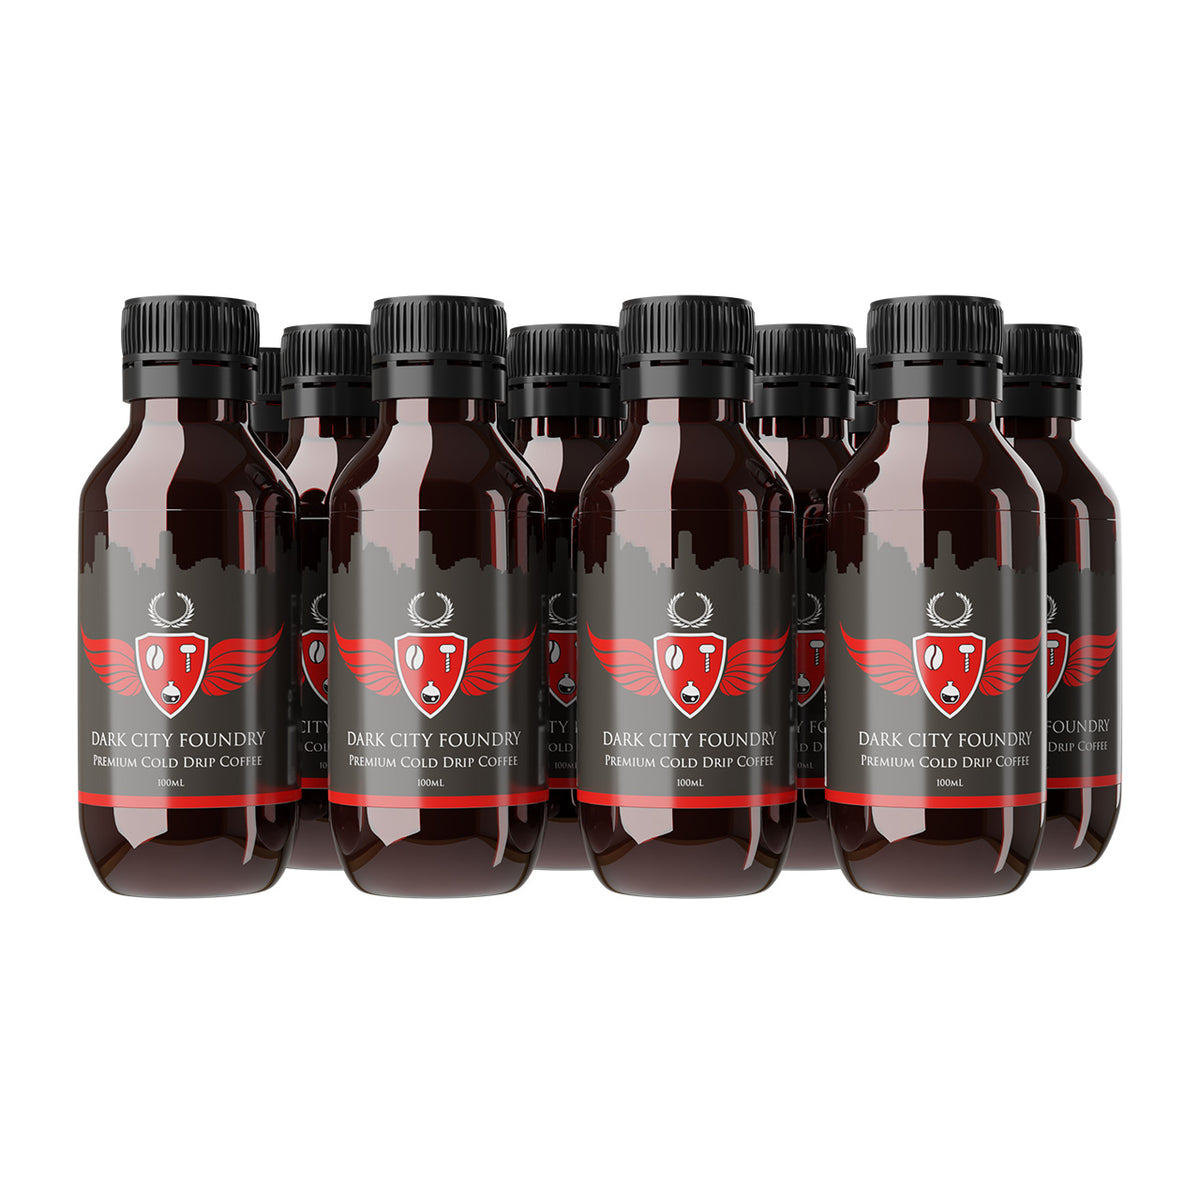 buy cold drip coffee melbourne. 12 x 100ml bottles